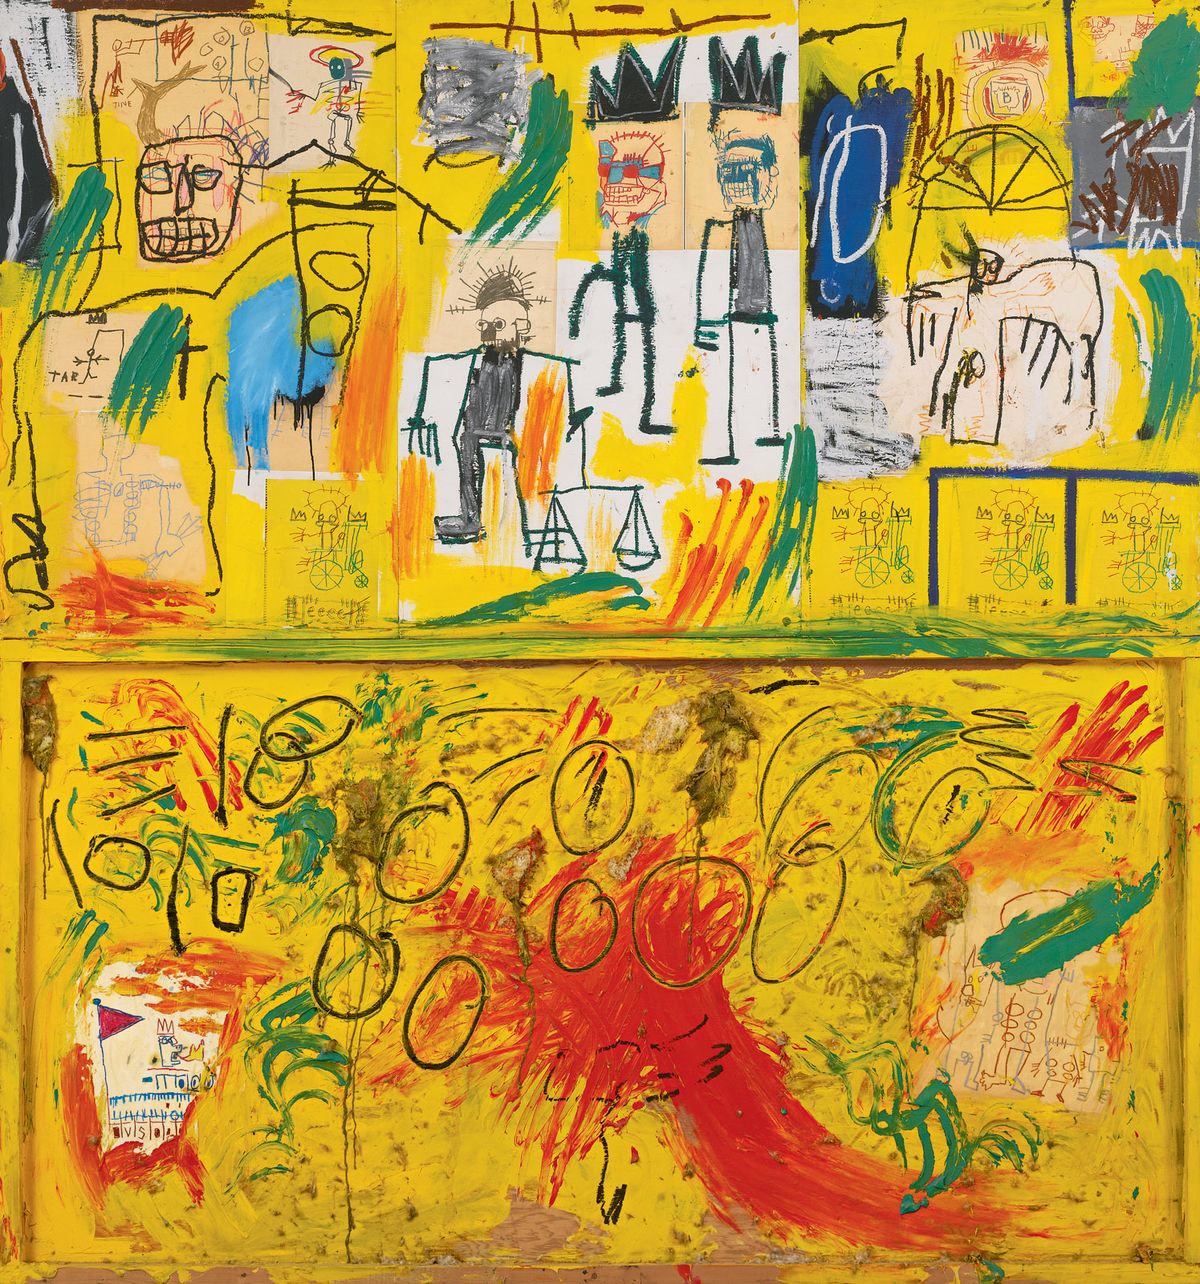 Jean-Michel Basquiat's Untitled (Yellow Tar and Feathers) (1981) Courtesy of CCBB